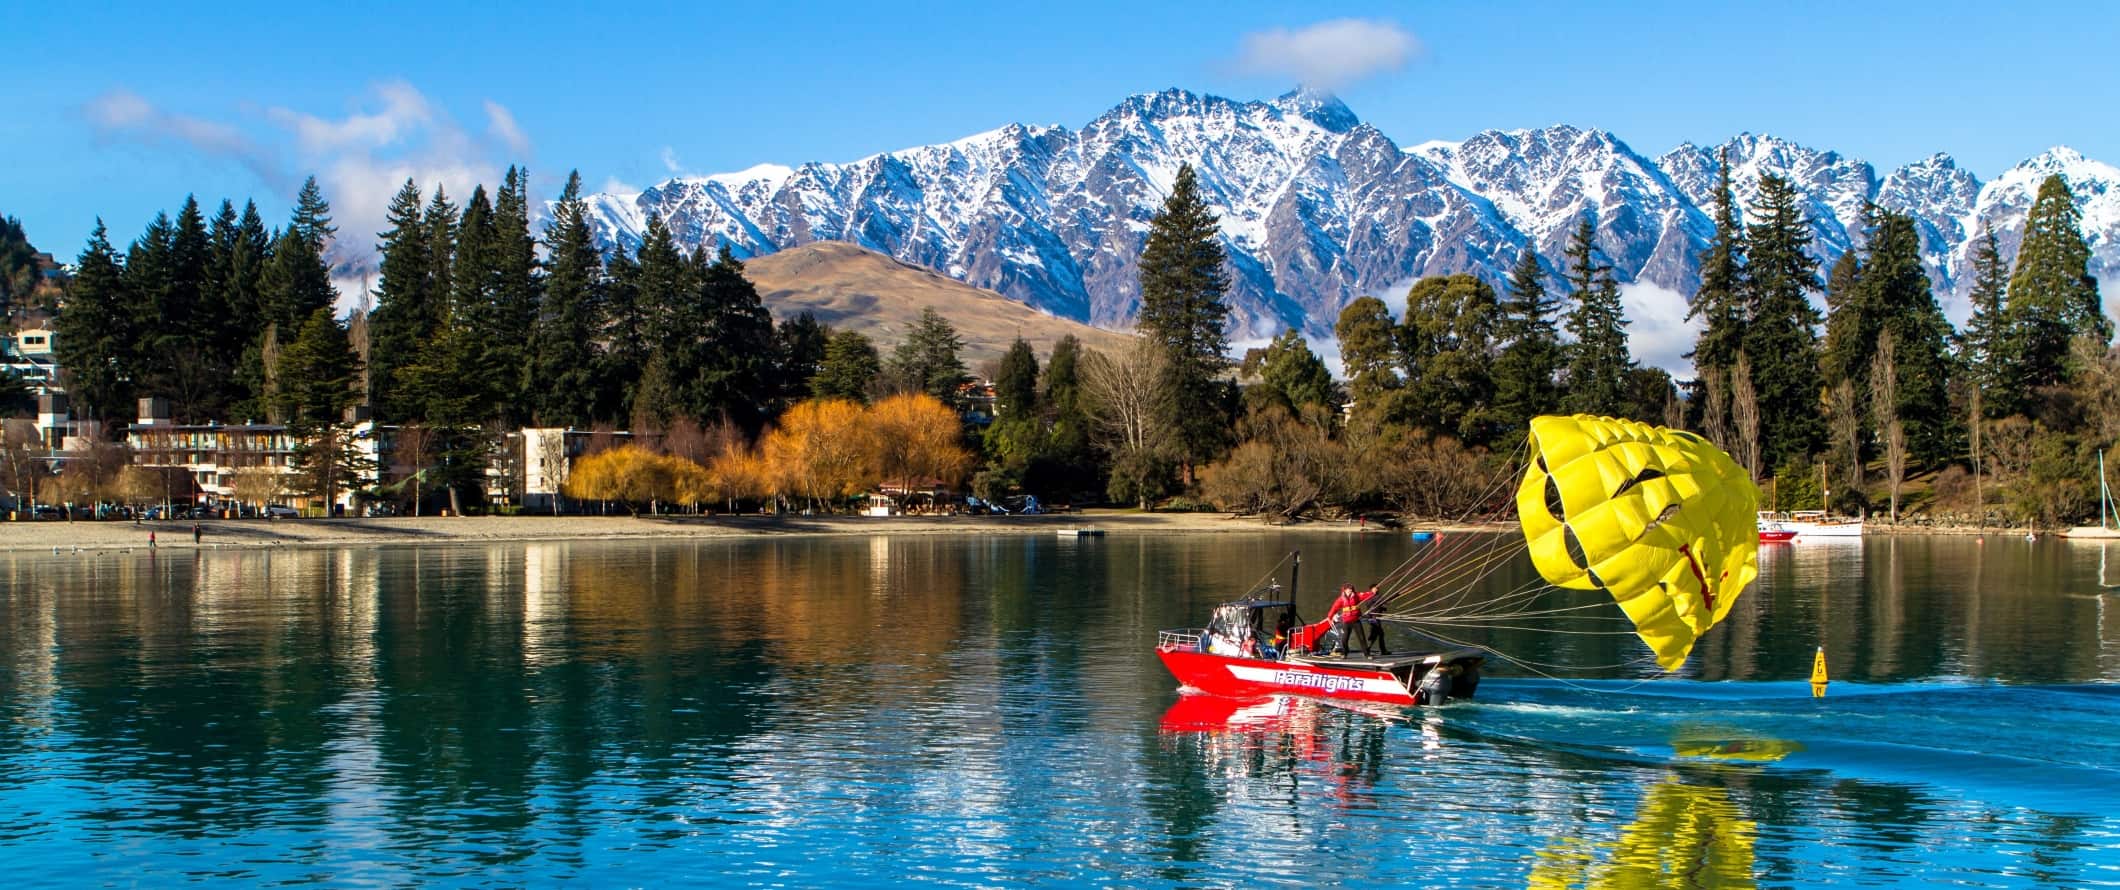 Boat with a parachute behind it in Lake Wakatipu, Queenstown, New Zealand.